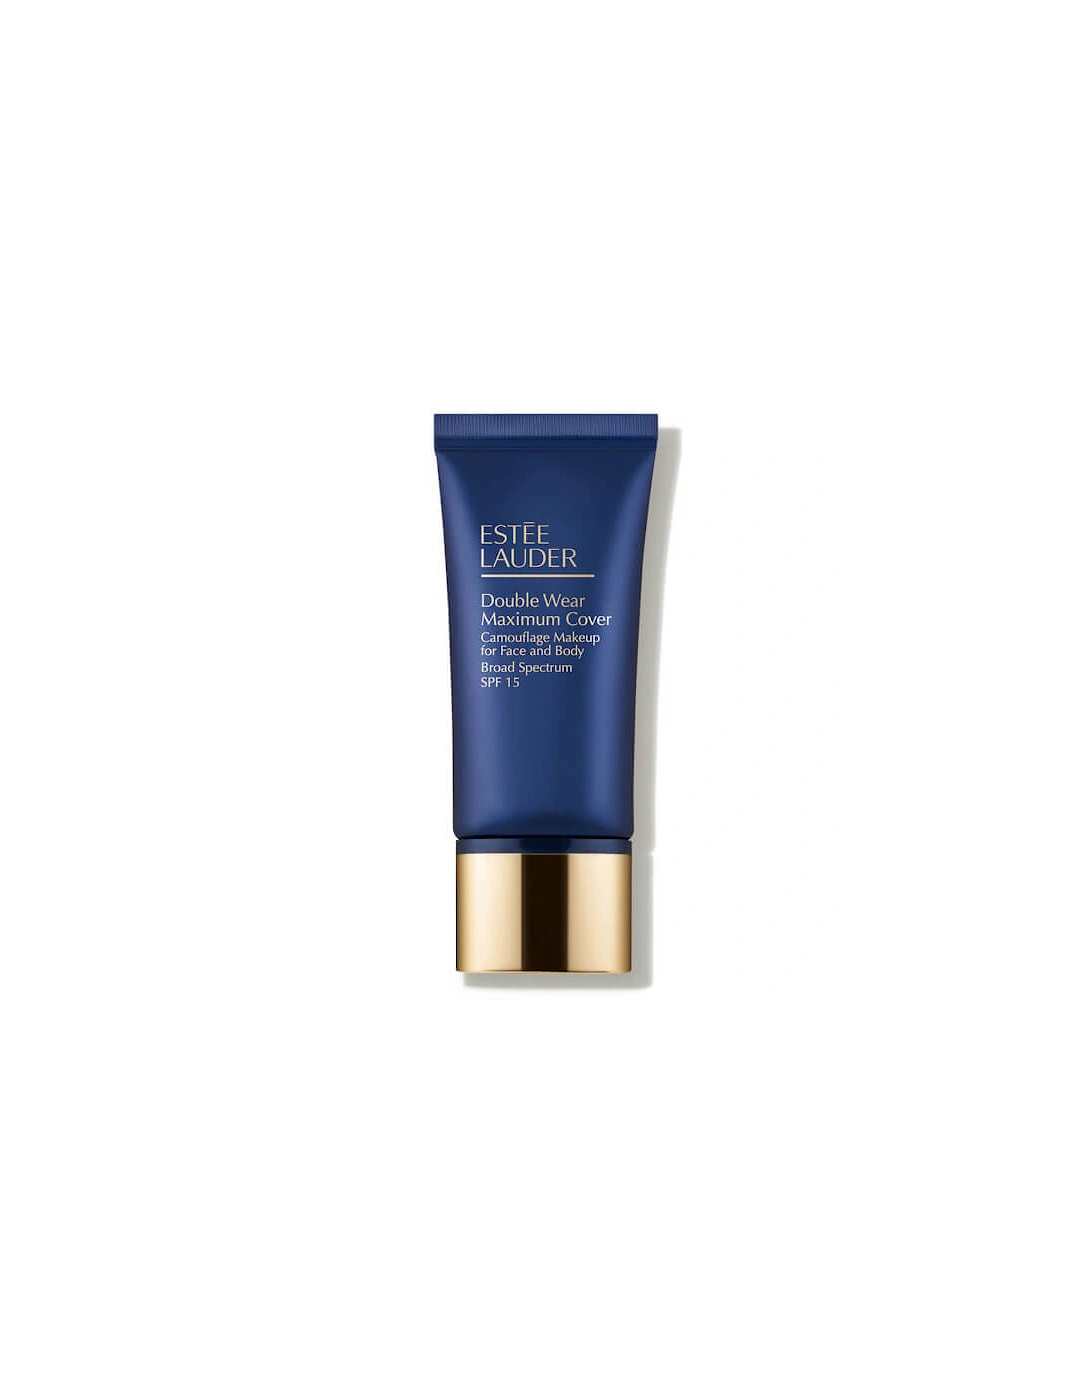 Estée Lauder Double Wear Maximum Cover Camouflage Makeup for Face and Body SPF15 in Creamy Tan Medium, 2 of 1